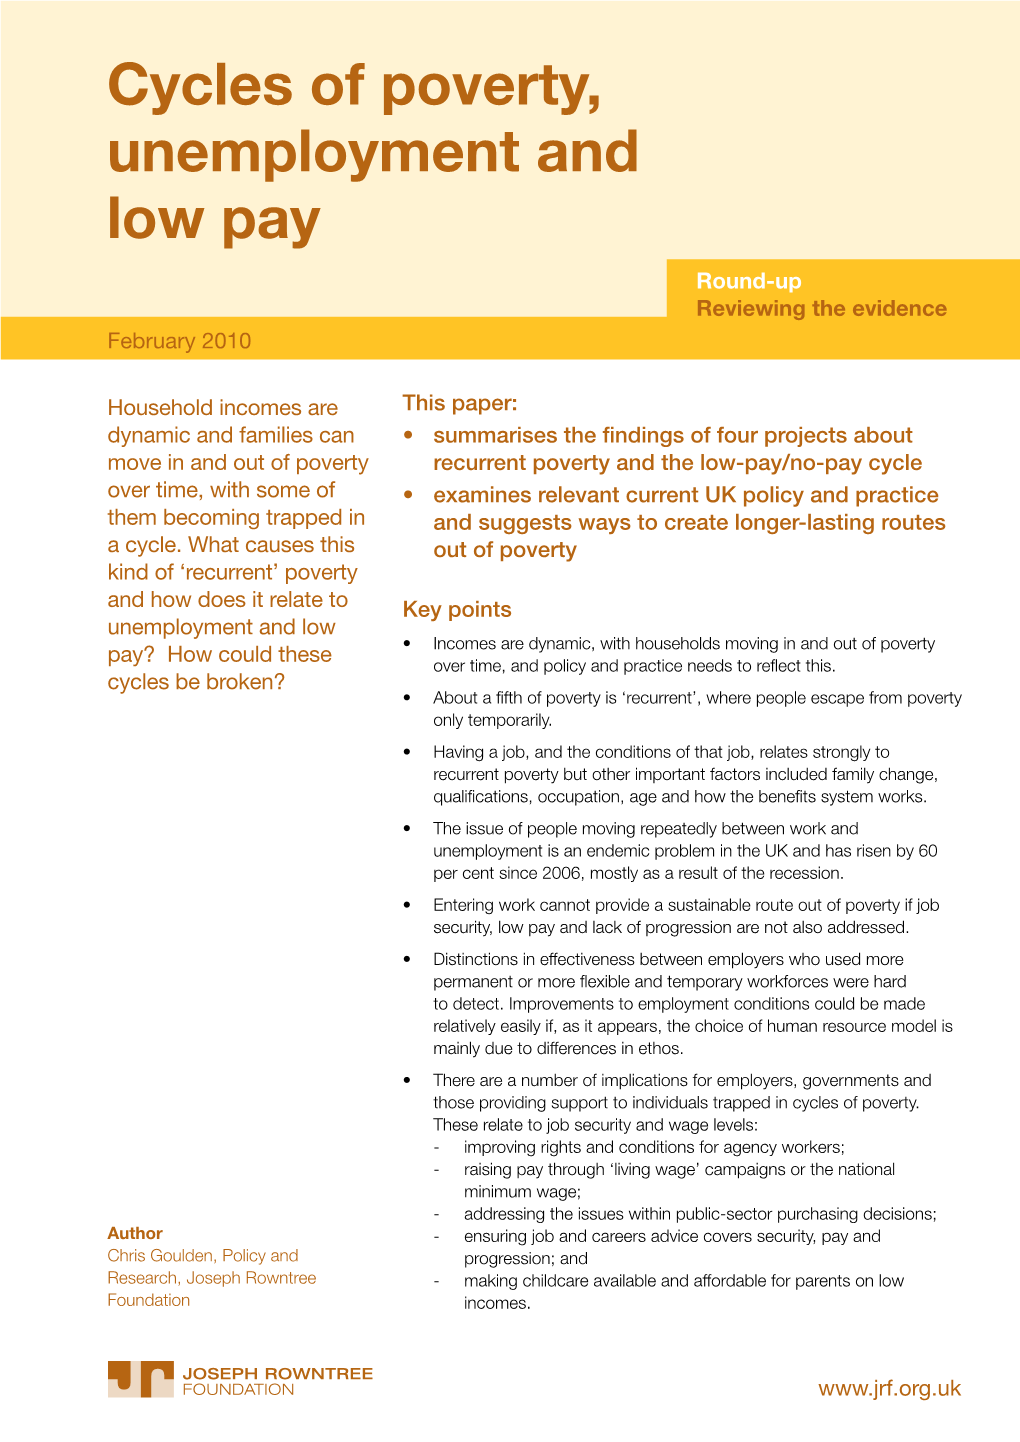 Cycles of Poverty, Unemployment and Low Pay Round-Up Reviewing the Evidence February 2010